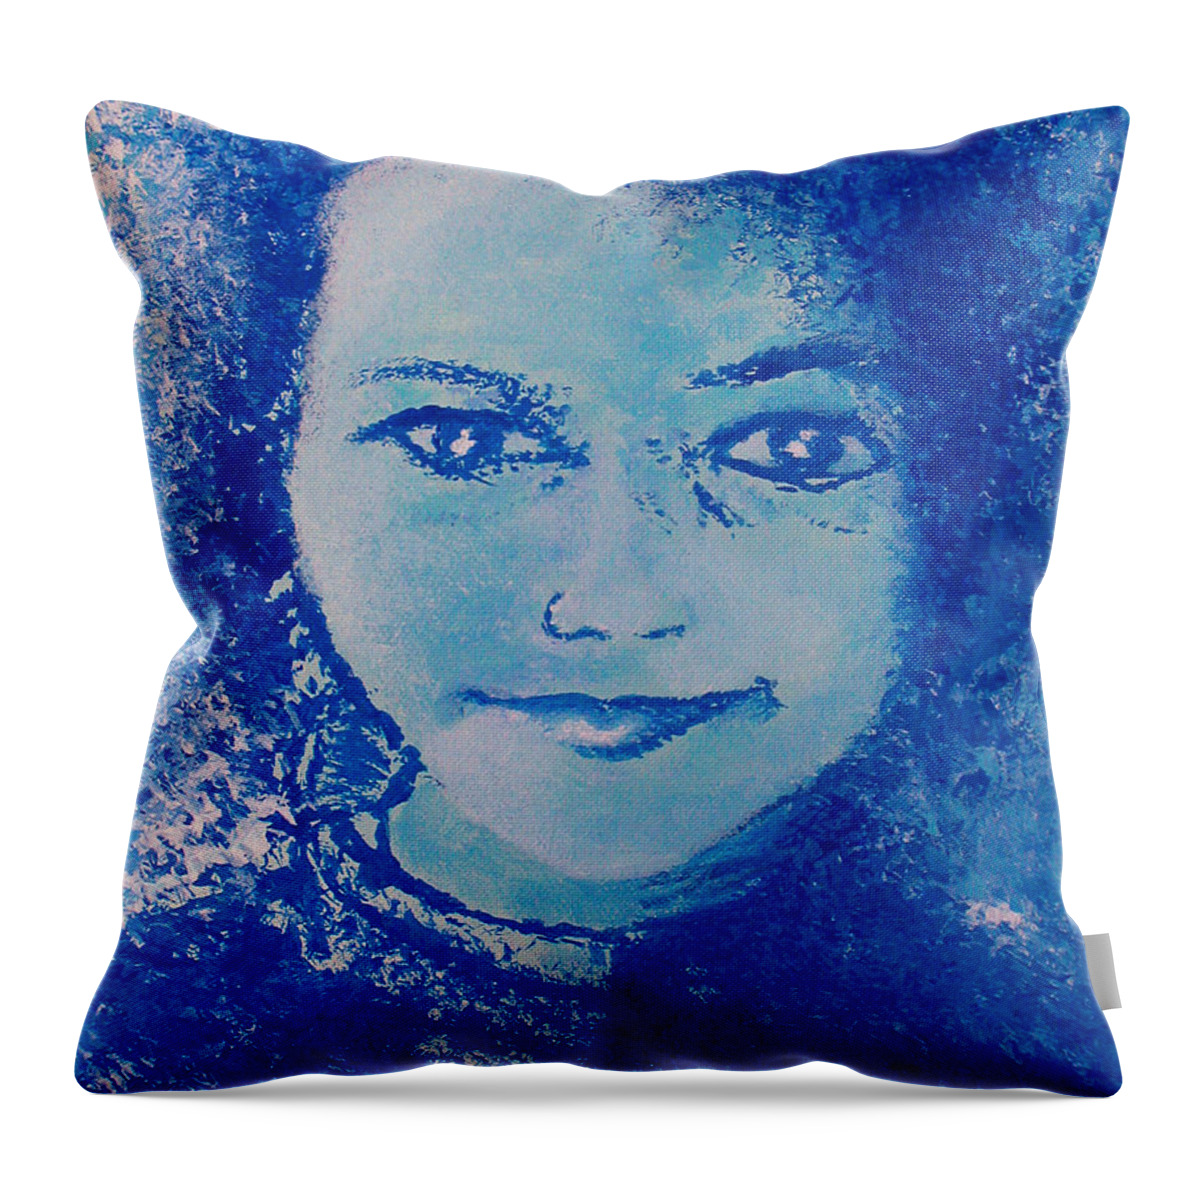 Girl Throw Pillow featuring the painting Young Girl In Blue by Alys Caviness-Gober